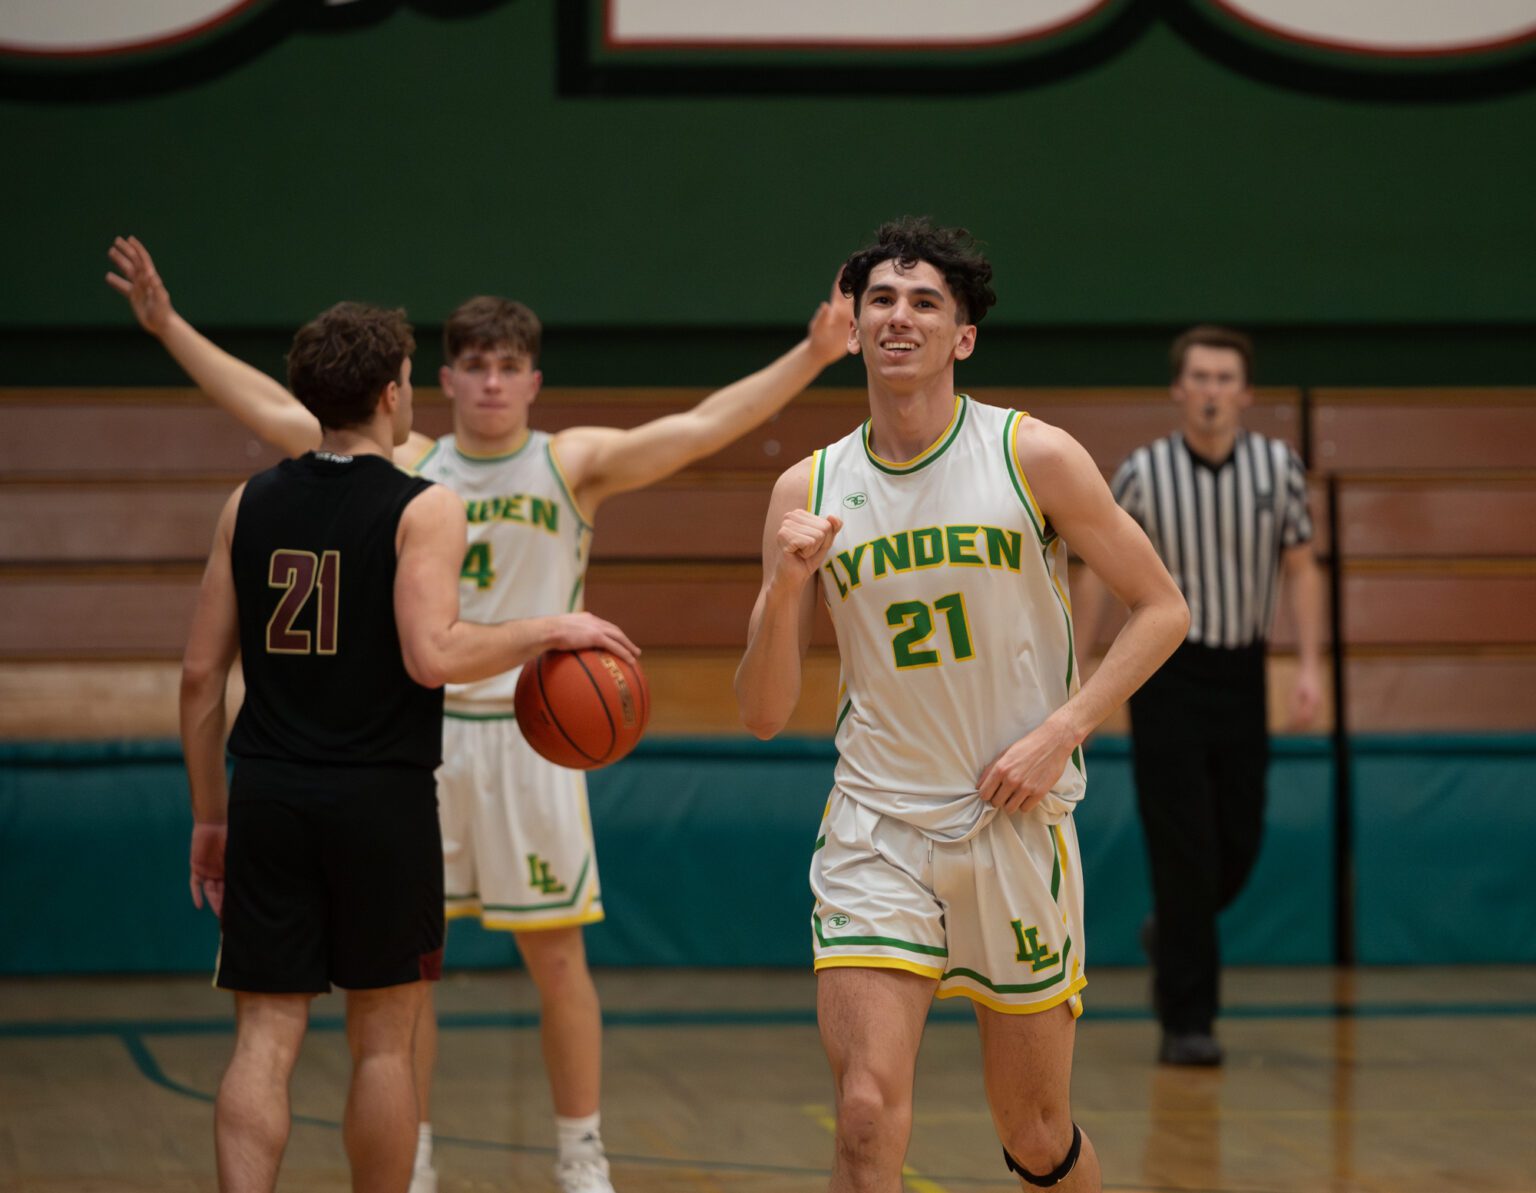 Lynden senior guard Anthony Canales pumps his fist as the clock expires Friday, Feb. 9 during the Lions' 62-53 win over Lakewood in the 2A District 1 semifinals at Mount Vernon High School.